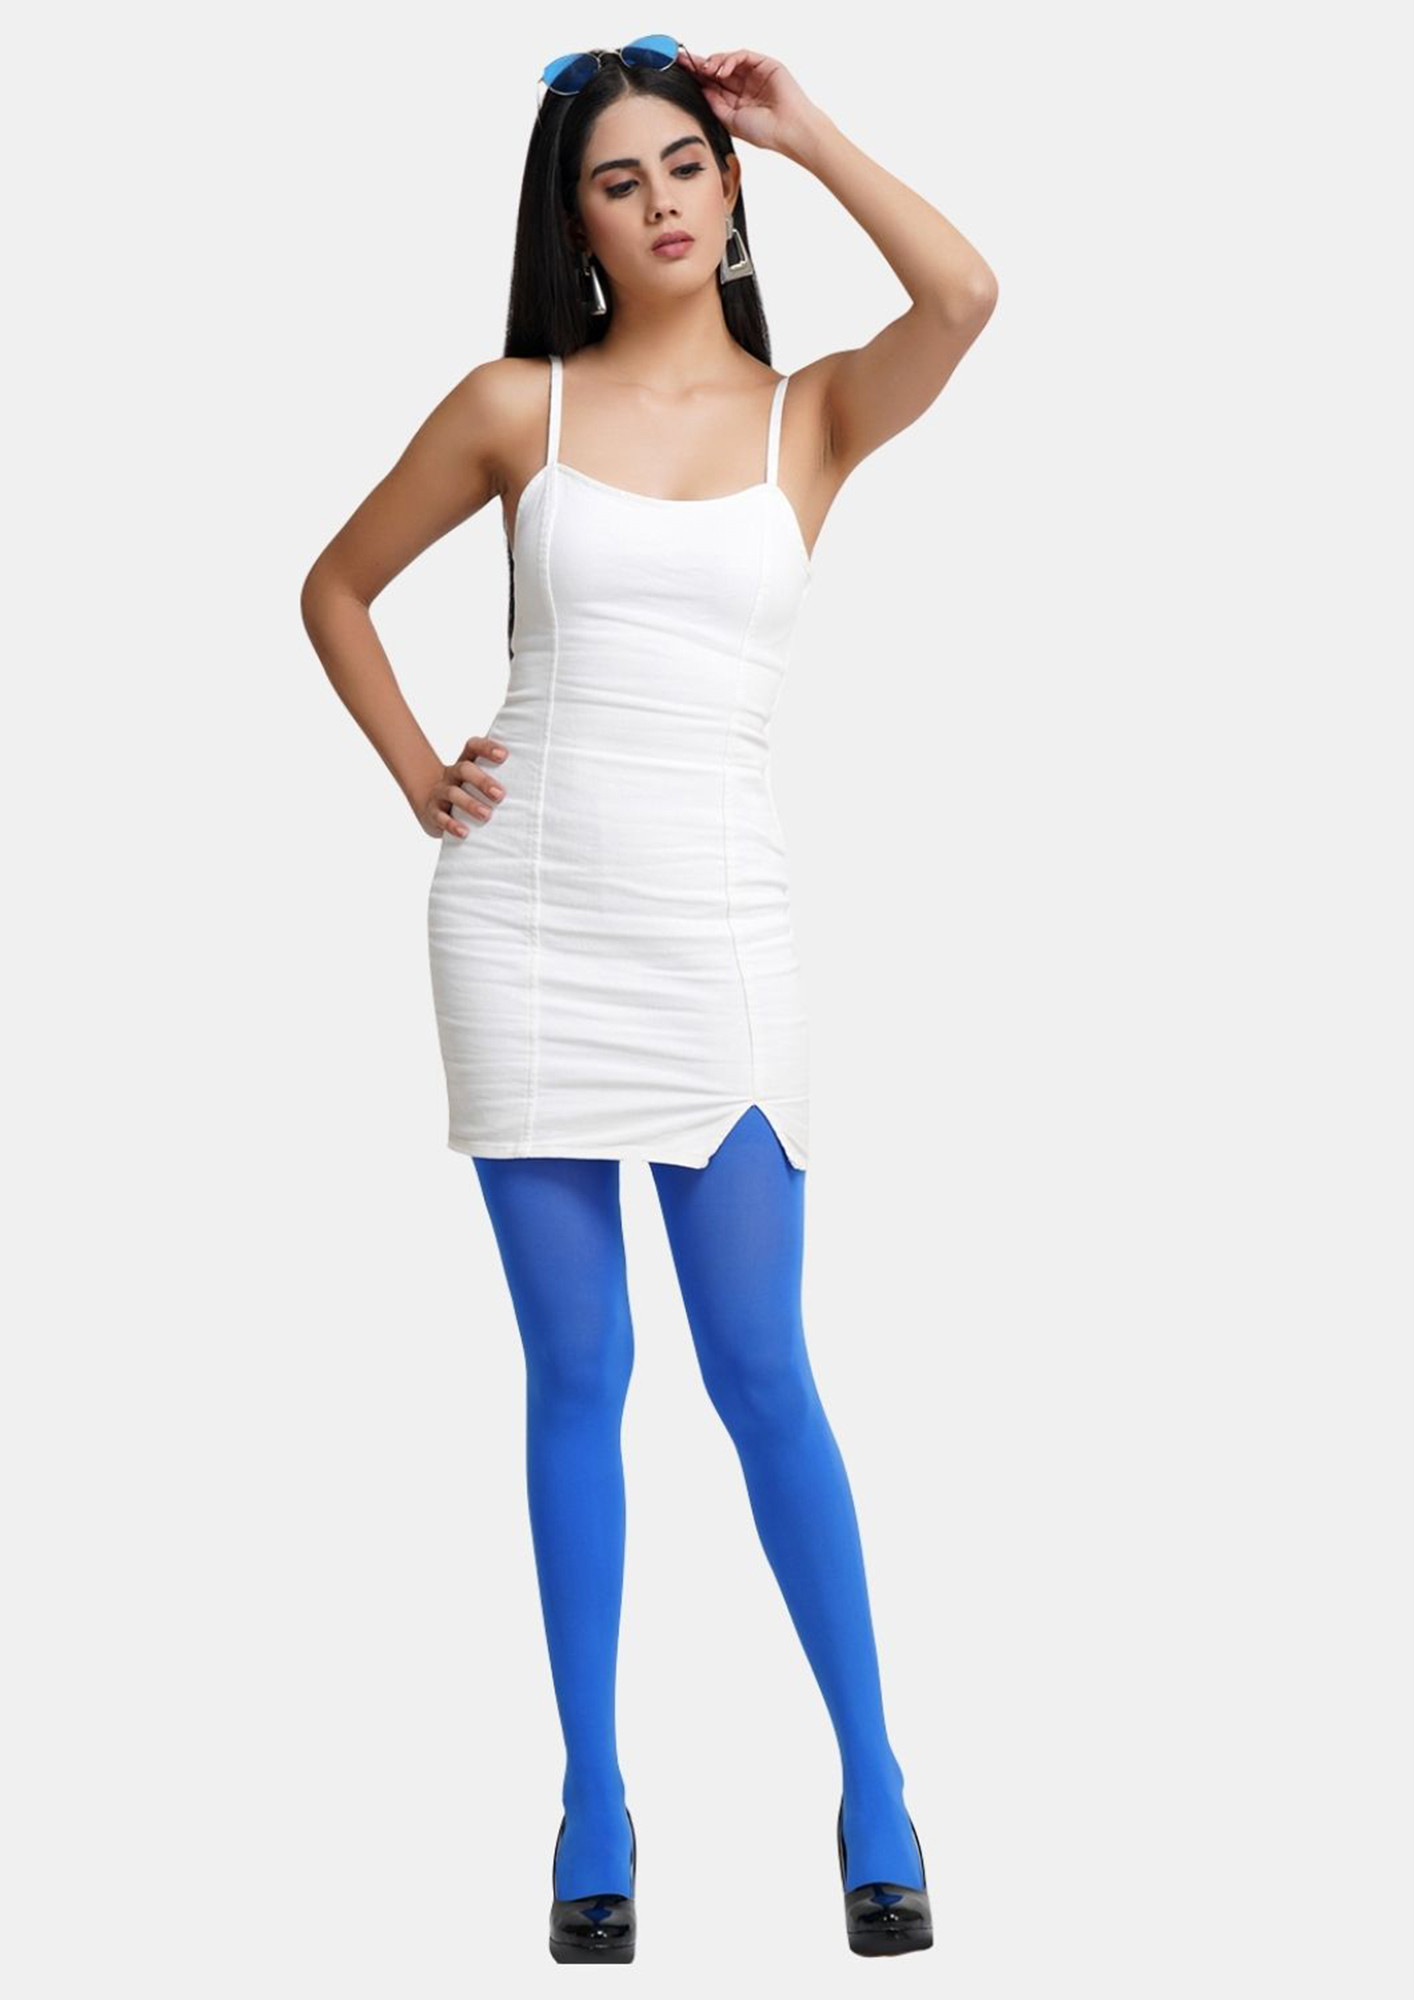 Buy NEXT2SKIN Women Nylon Opaque Pantyhose Stockings With Super Stretch  Waistband, L Size (Electric Blue) for Women Online in India